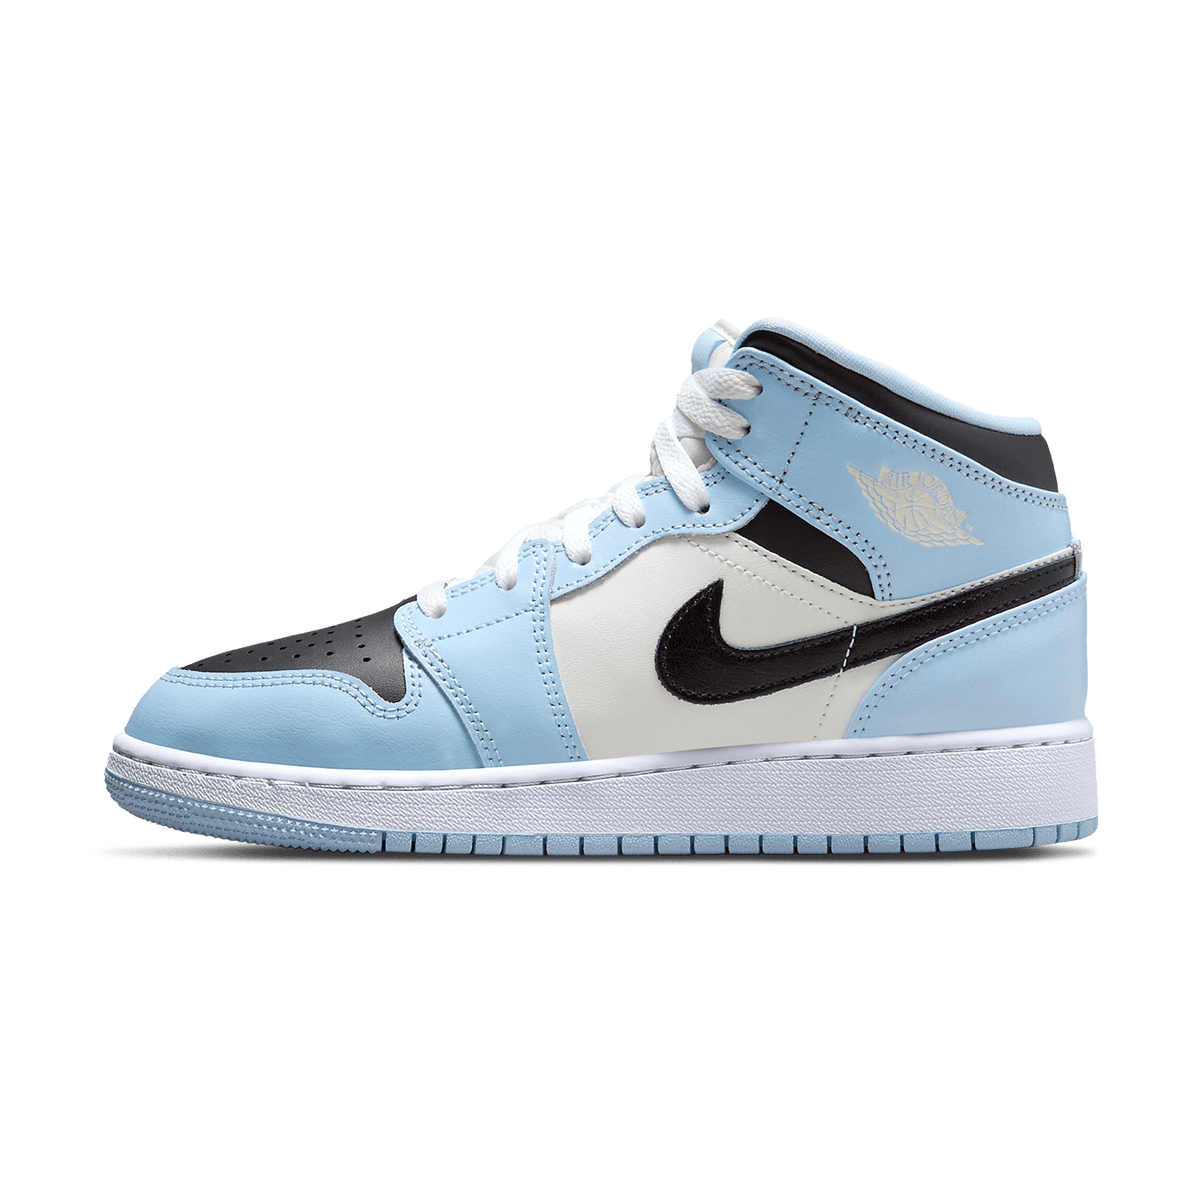 nike air baseline low price philippines shoes Mid GS 'Ice Blue' - JuzsportsShops